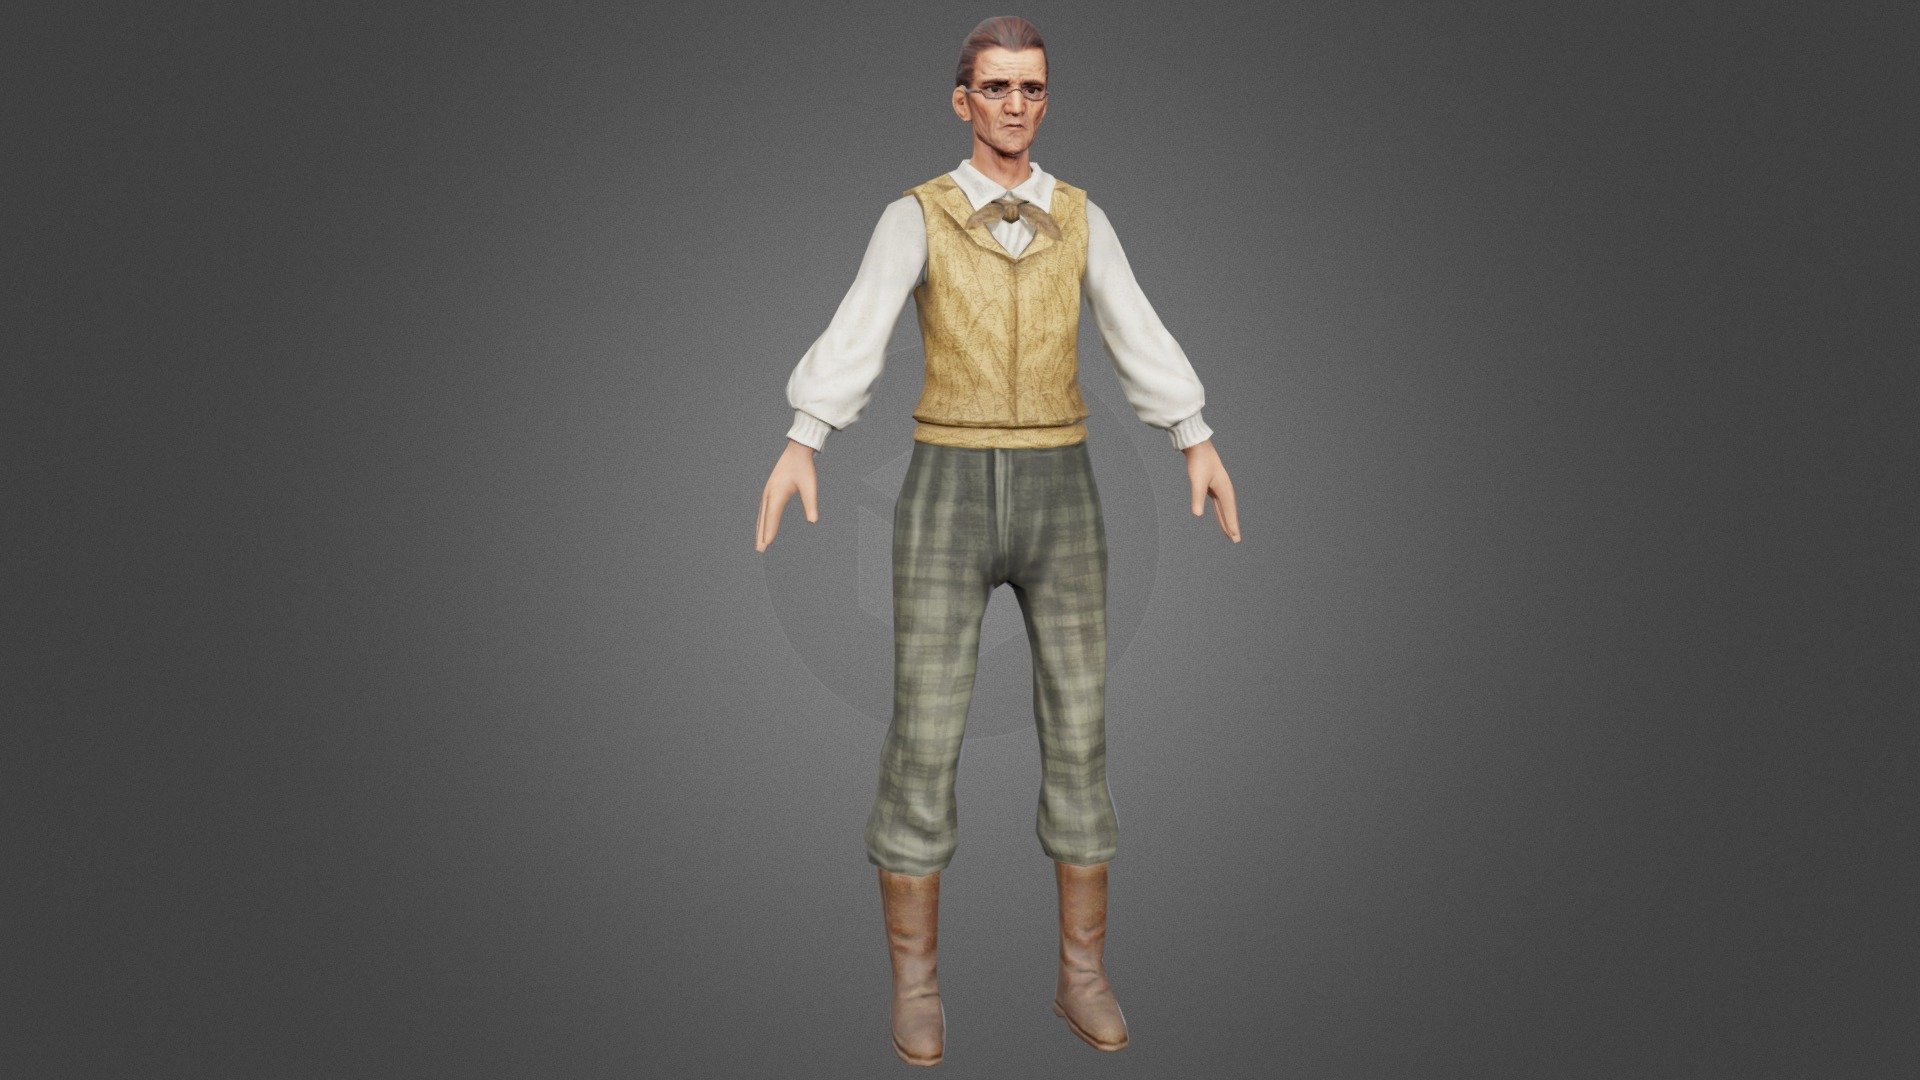 Shopkeeper NPC model for UMN VGDC Spring 2022 game project, Argent: Hidden Crown. Free for personal use 3d model